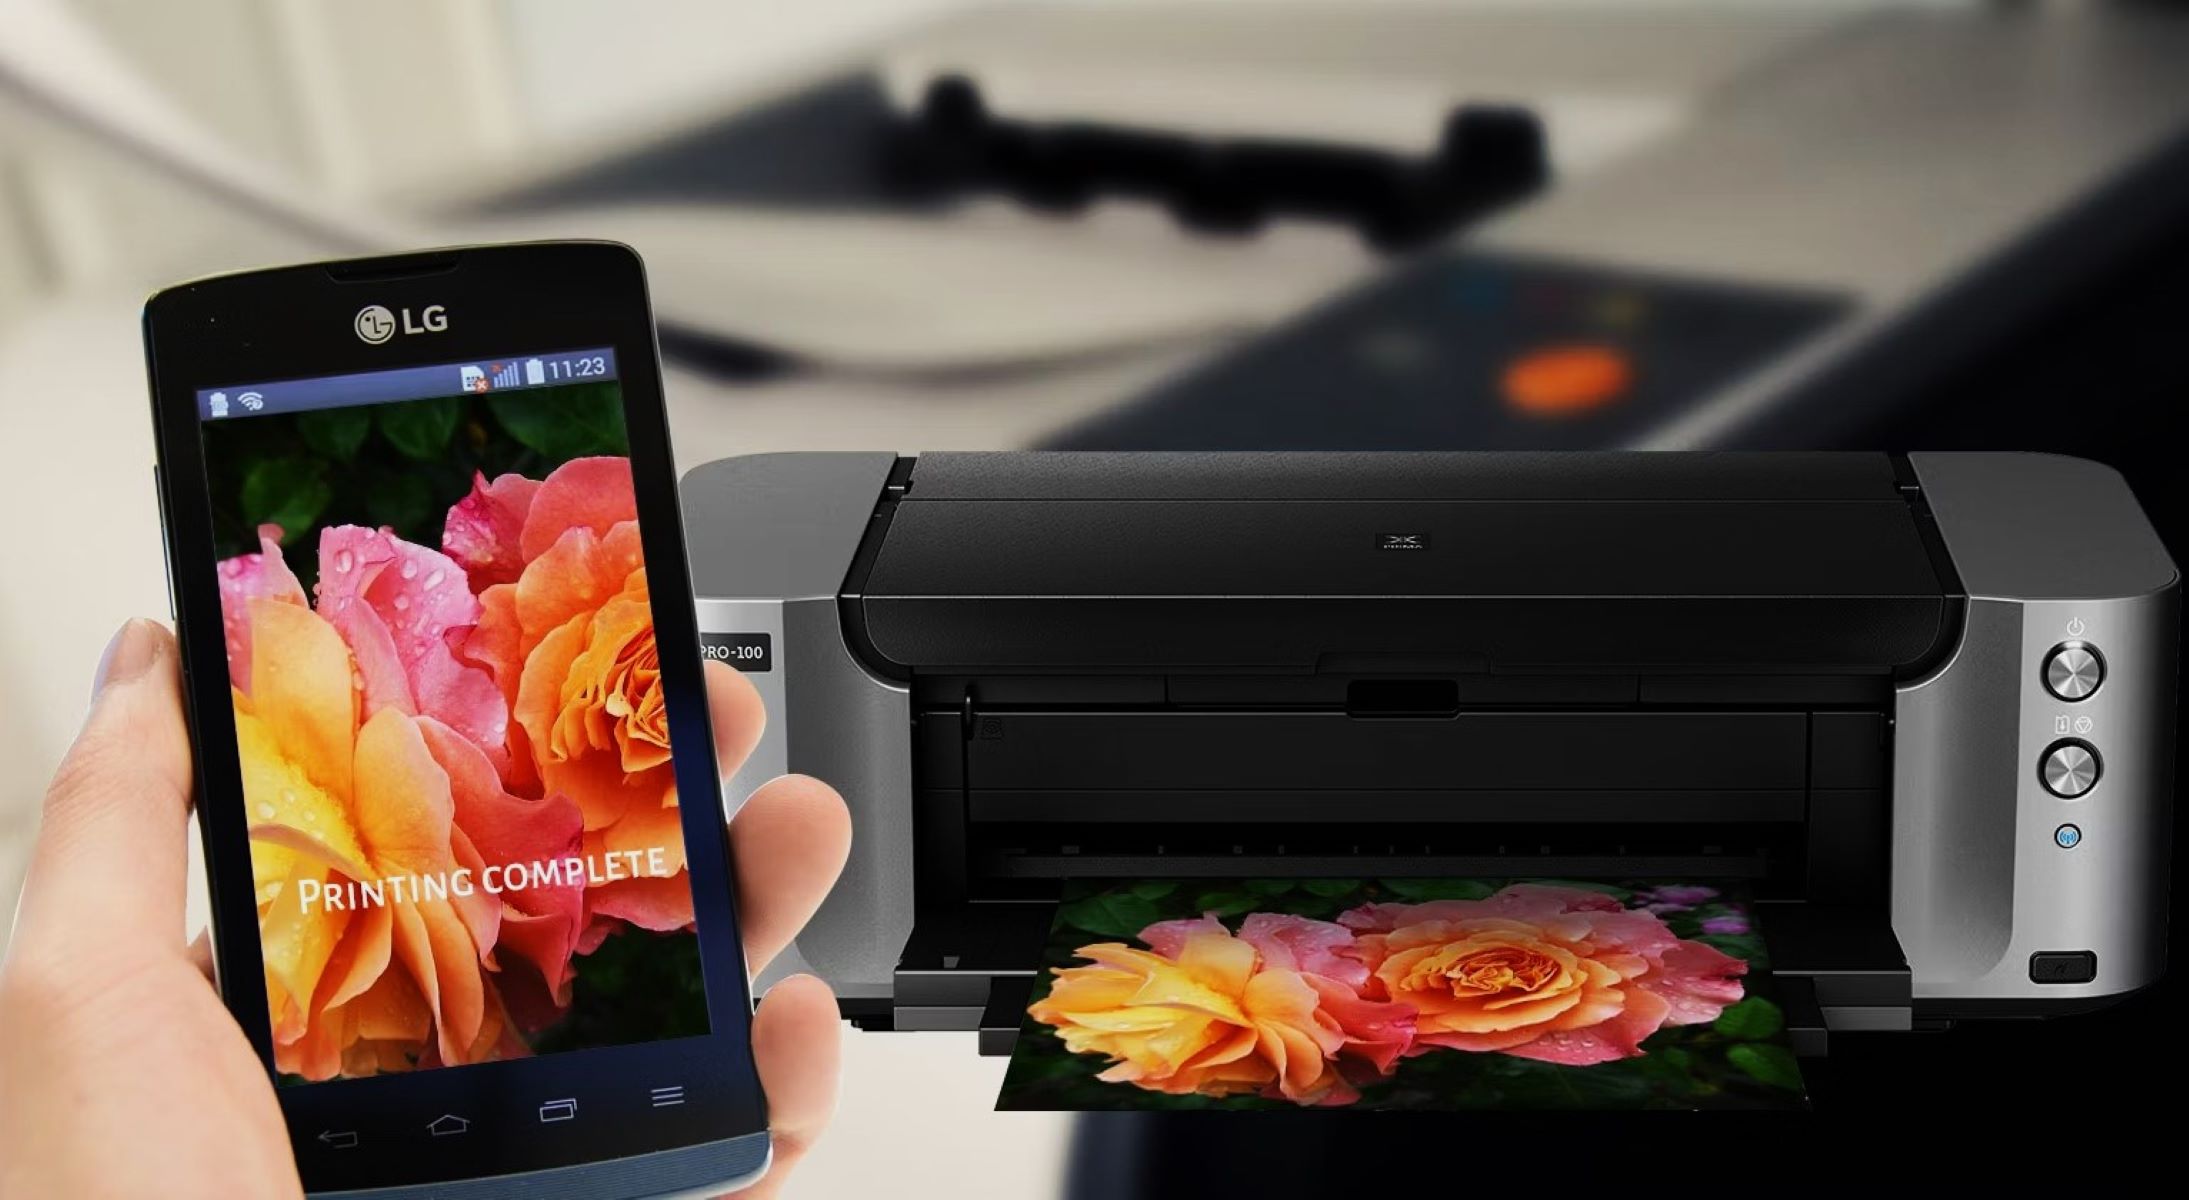 How To Find Printer On Android Phone